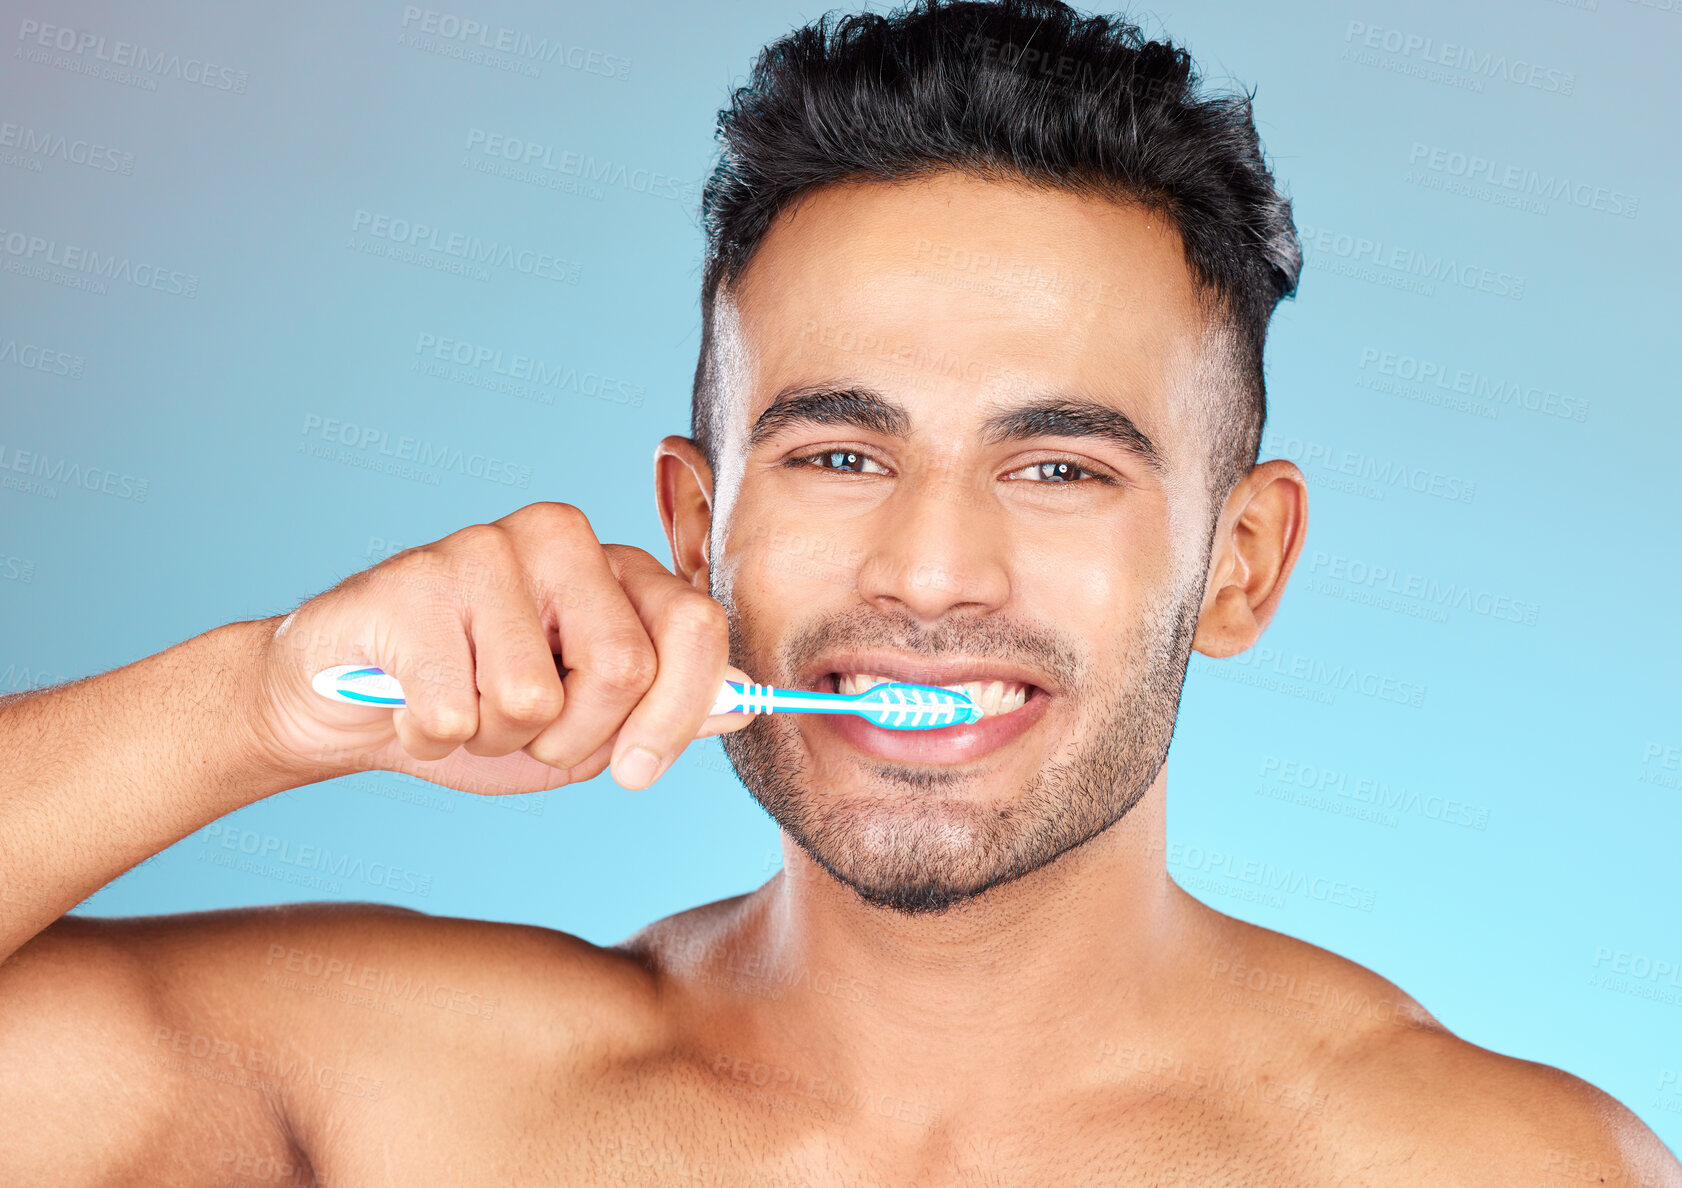 Buy stock photo Face portrait, dental and man brushing teeth in studio isolated on a blue background. Wellness, oral health and routine of happy male model holding toothbrush for hygiene, oral care and dental care.